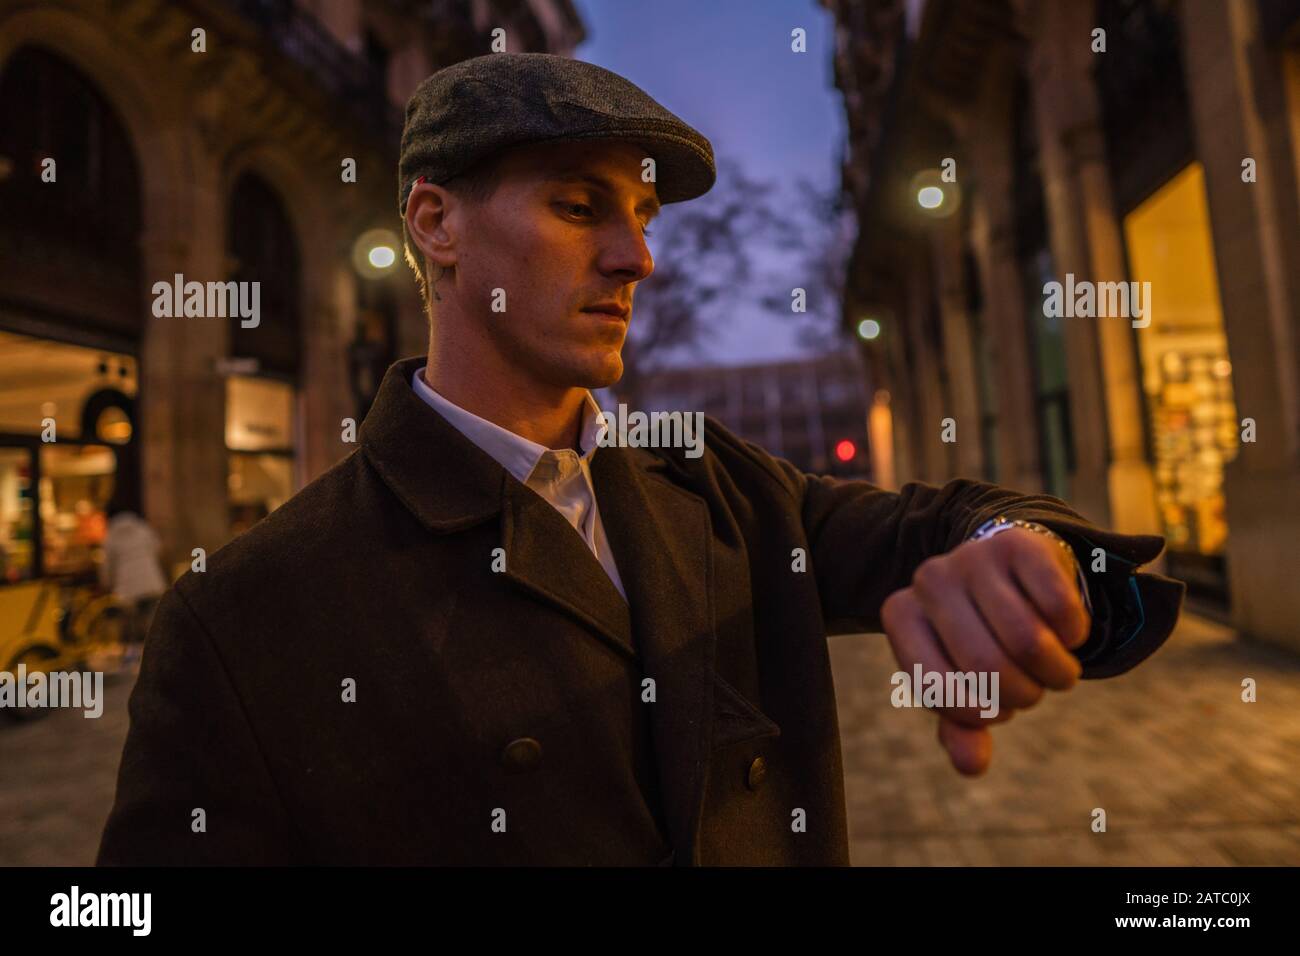 Old Fashion Man from the 1920s england Stock Photo